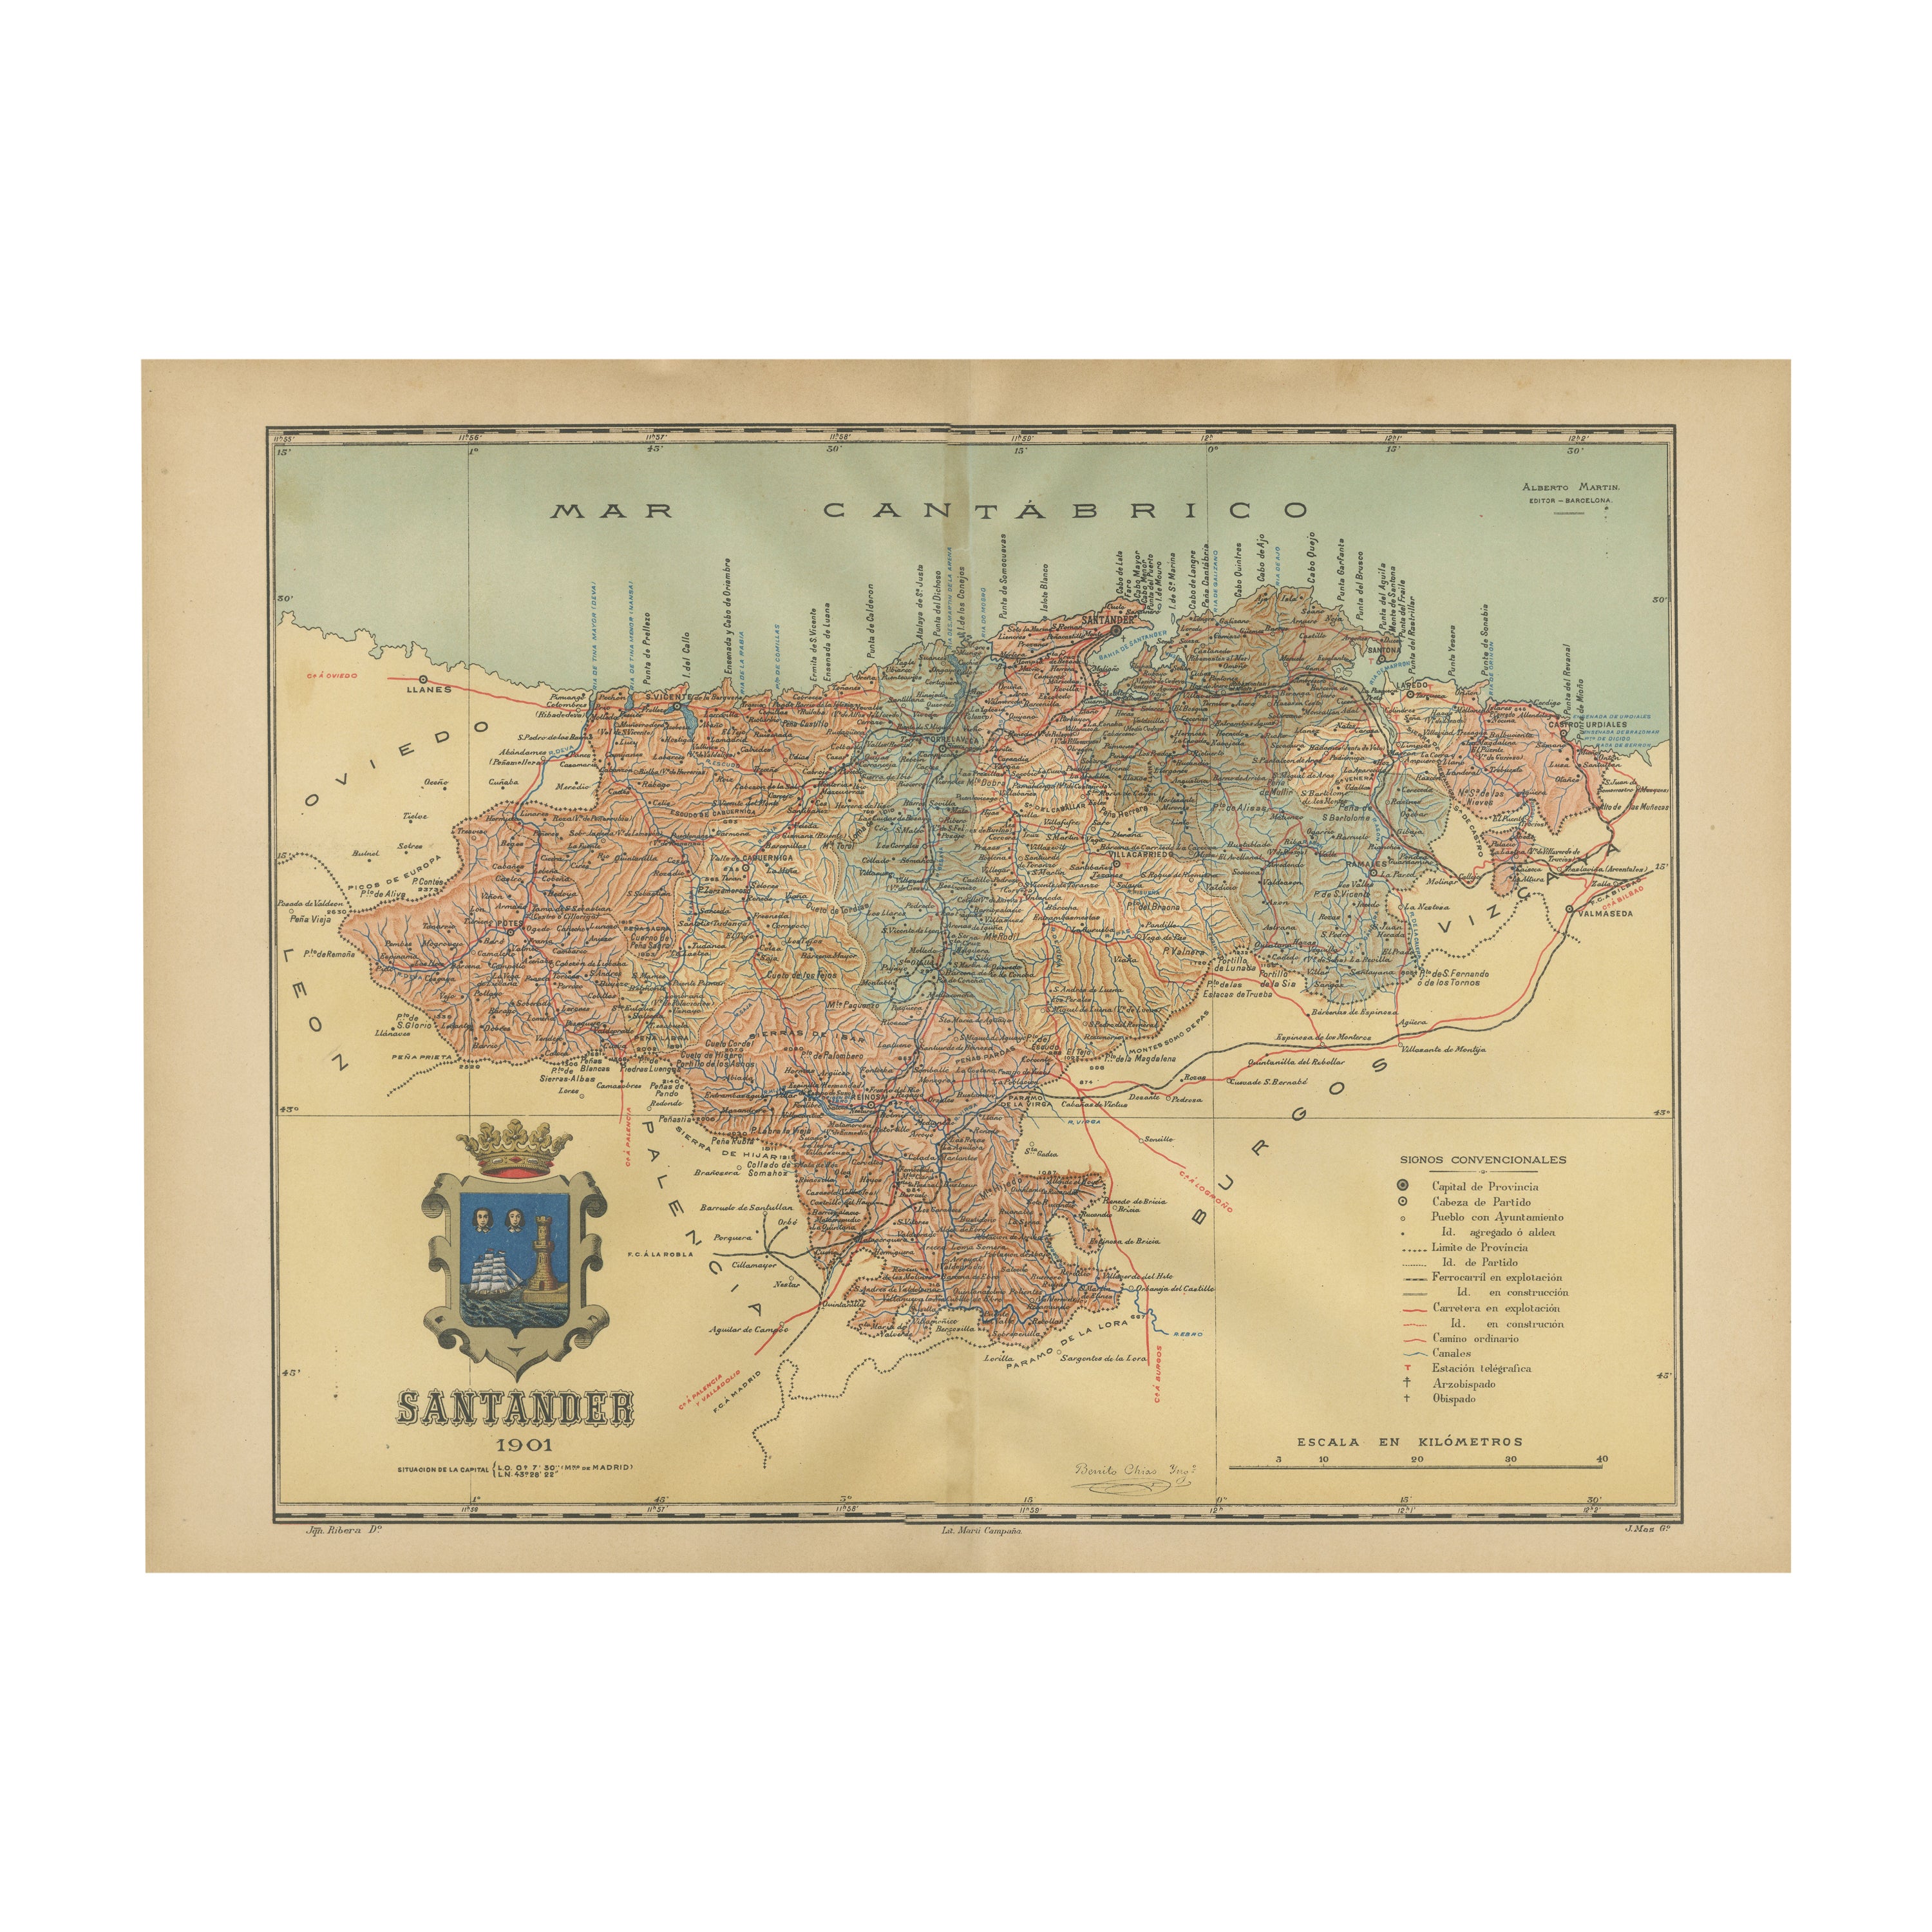 Maritime and Terrestrial Survey of Spanish Santander in 1901, An Original Map For Sale